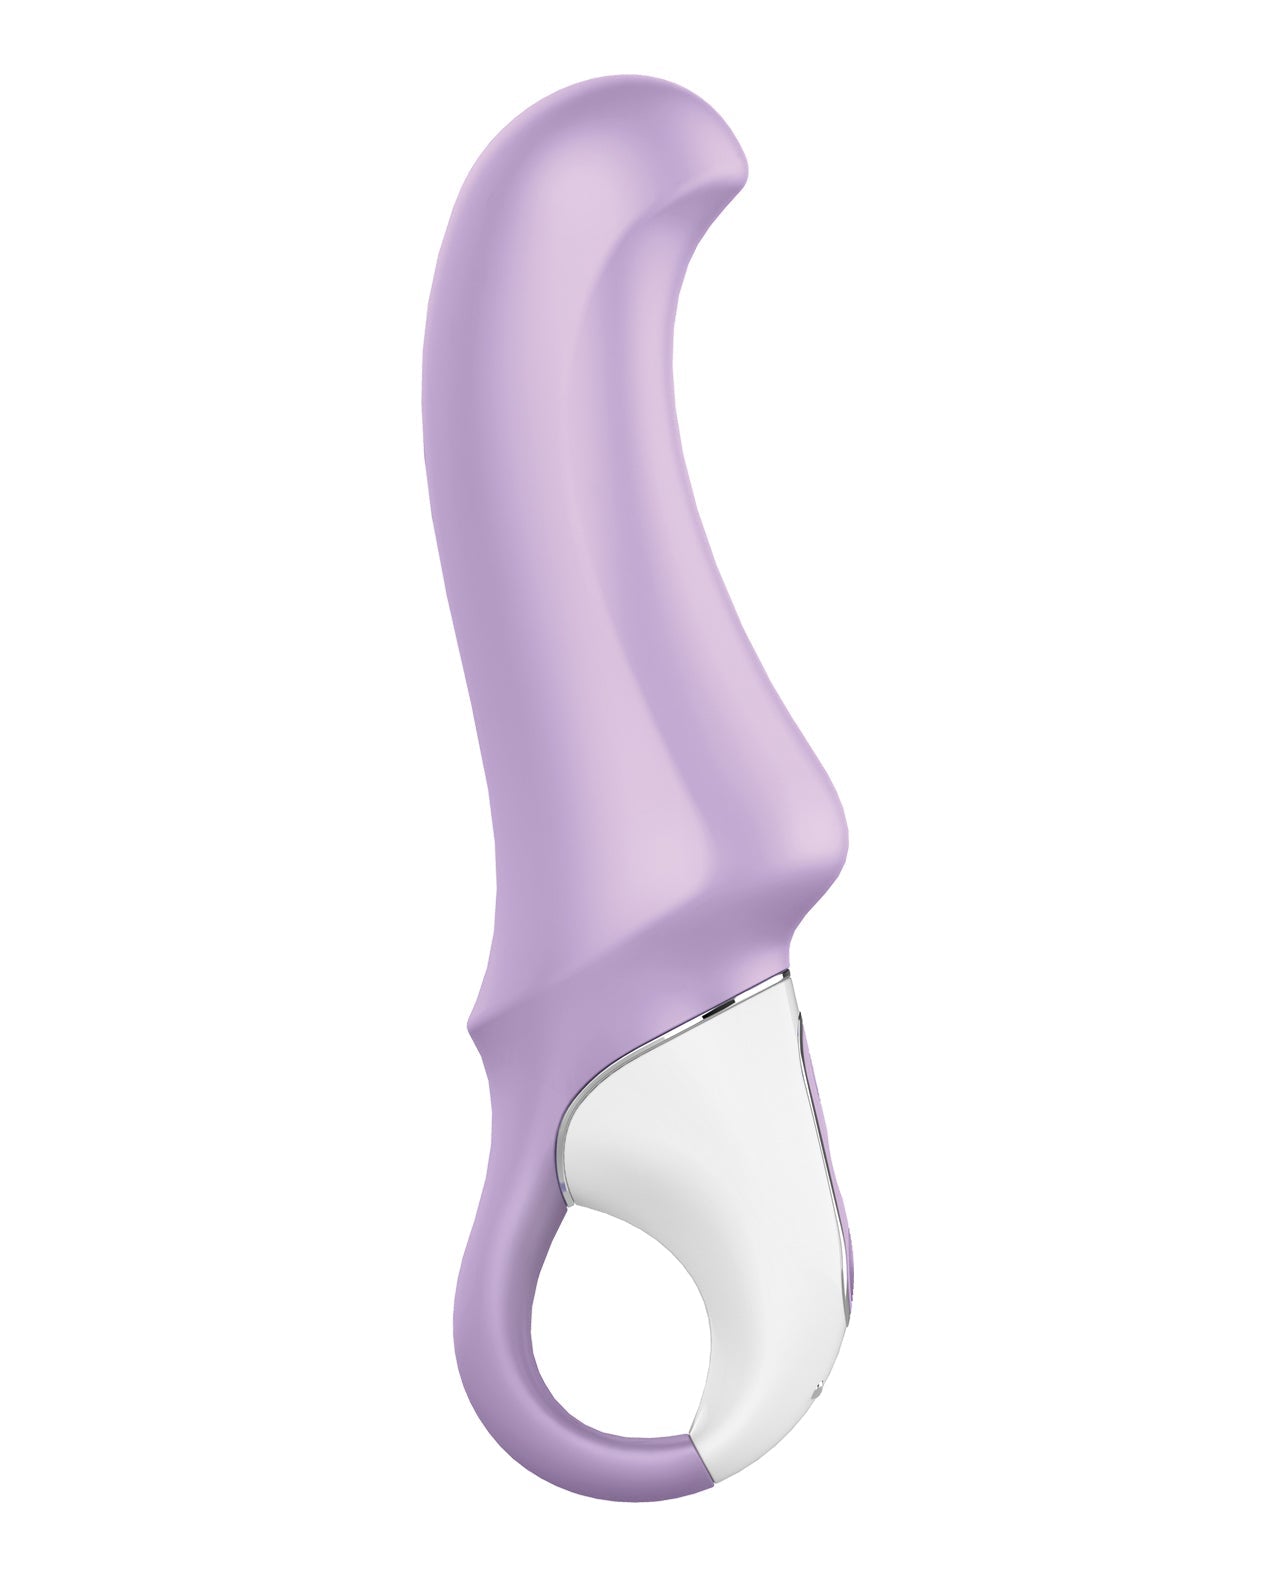 Satisfyer Vibes Charming Smile - Lilac